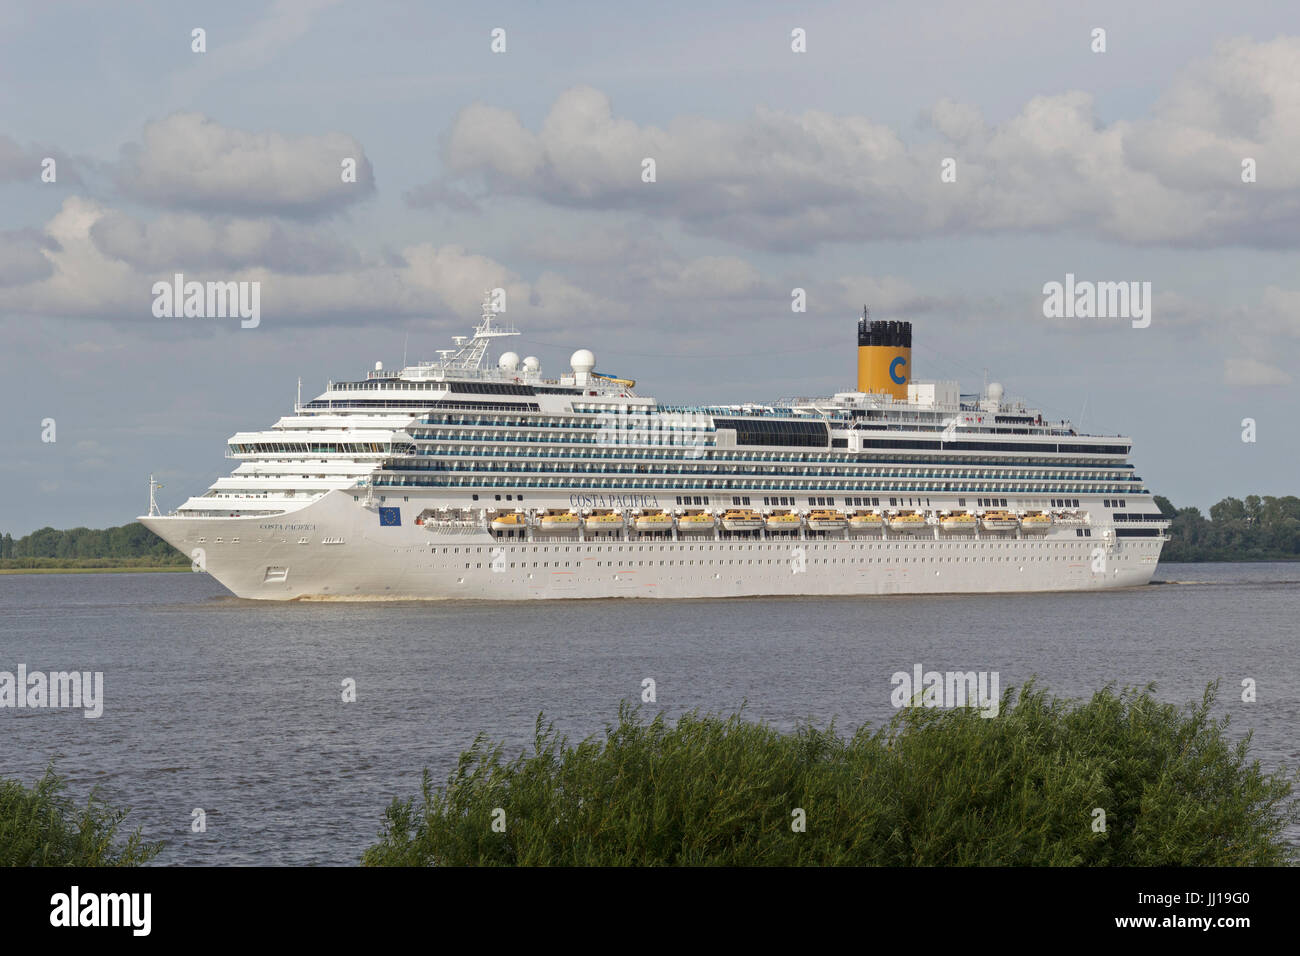 cruise ship Costa Pacifica on river Elbe near Luehe, Altes Land, Lower Saxony, Germany Stock Photo